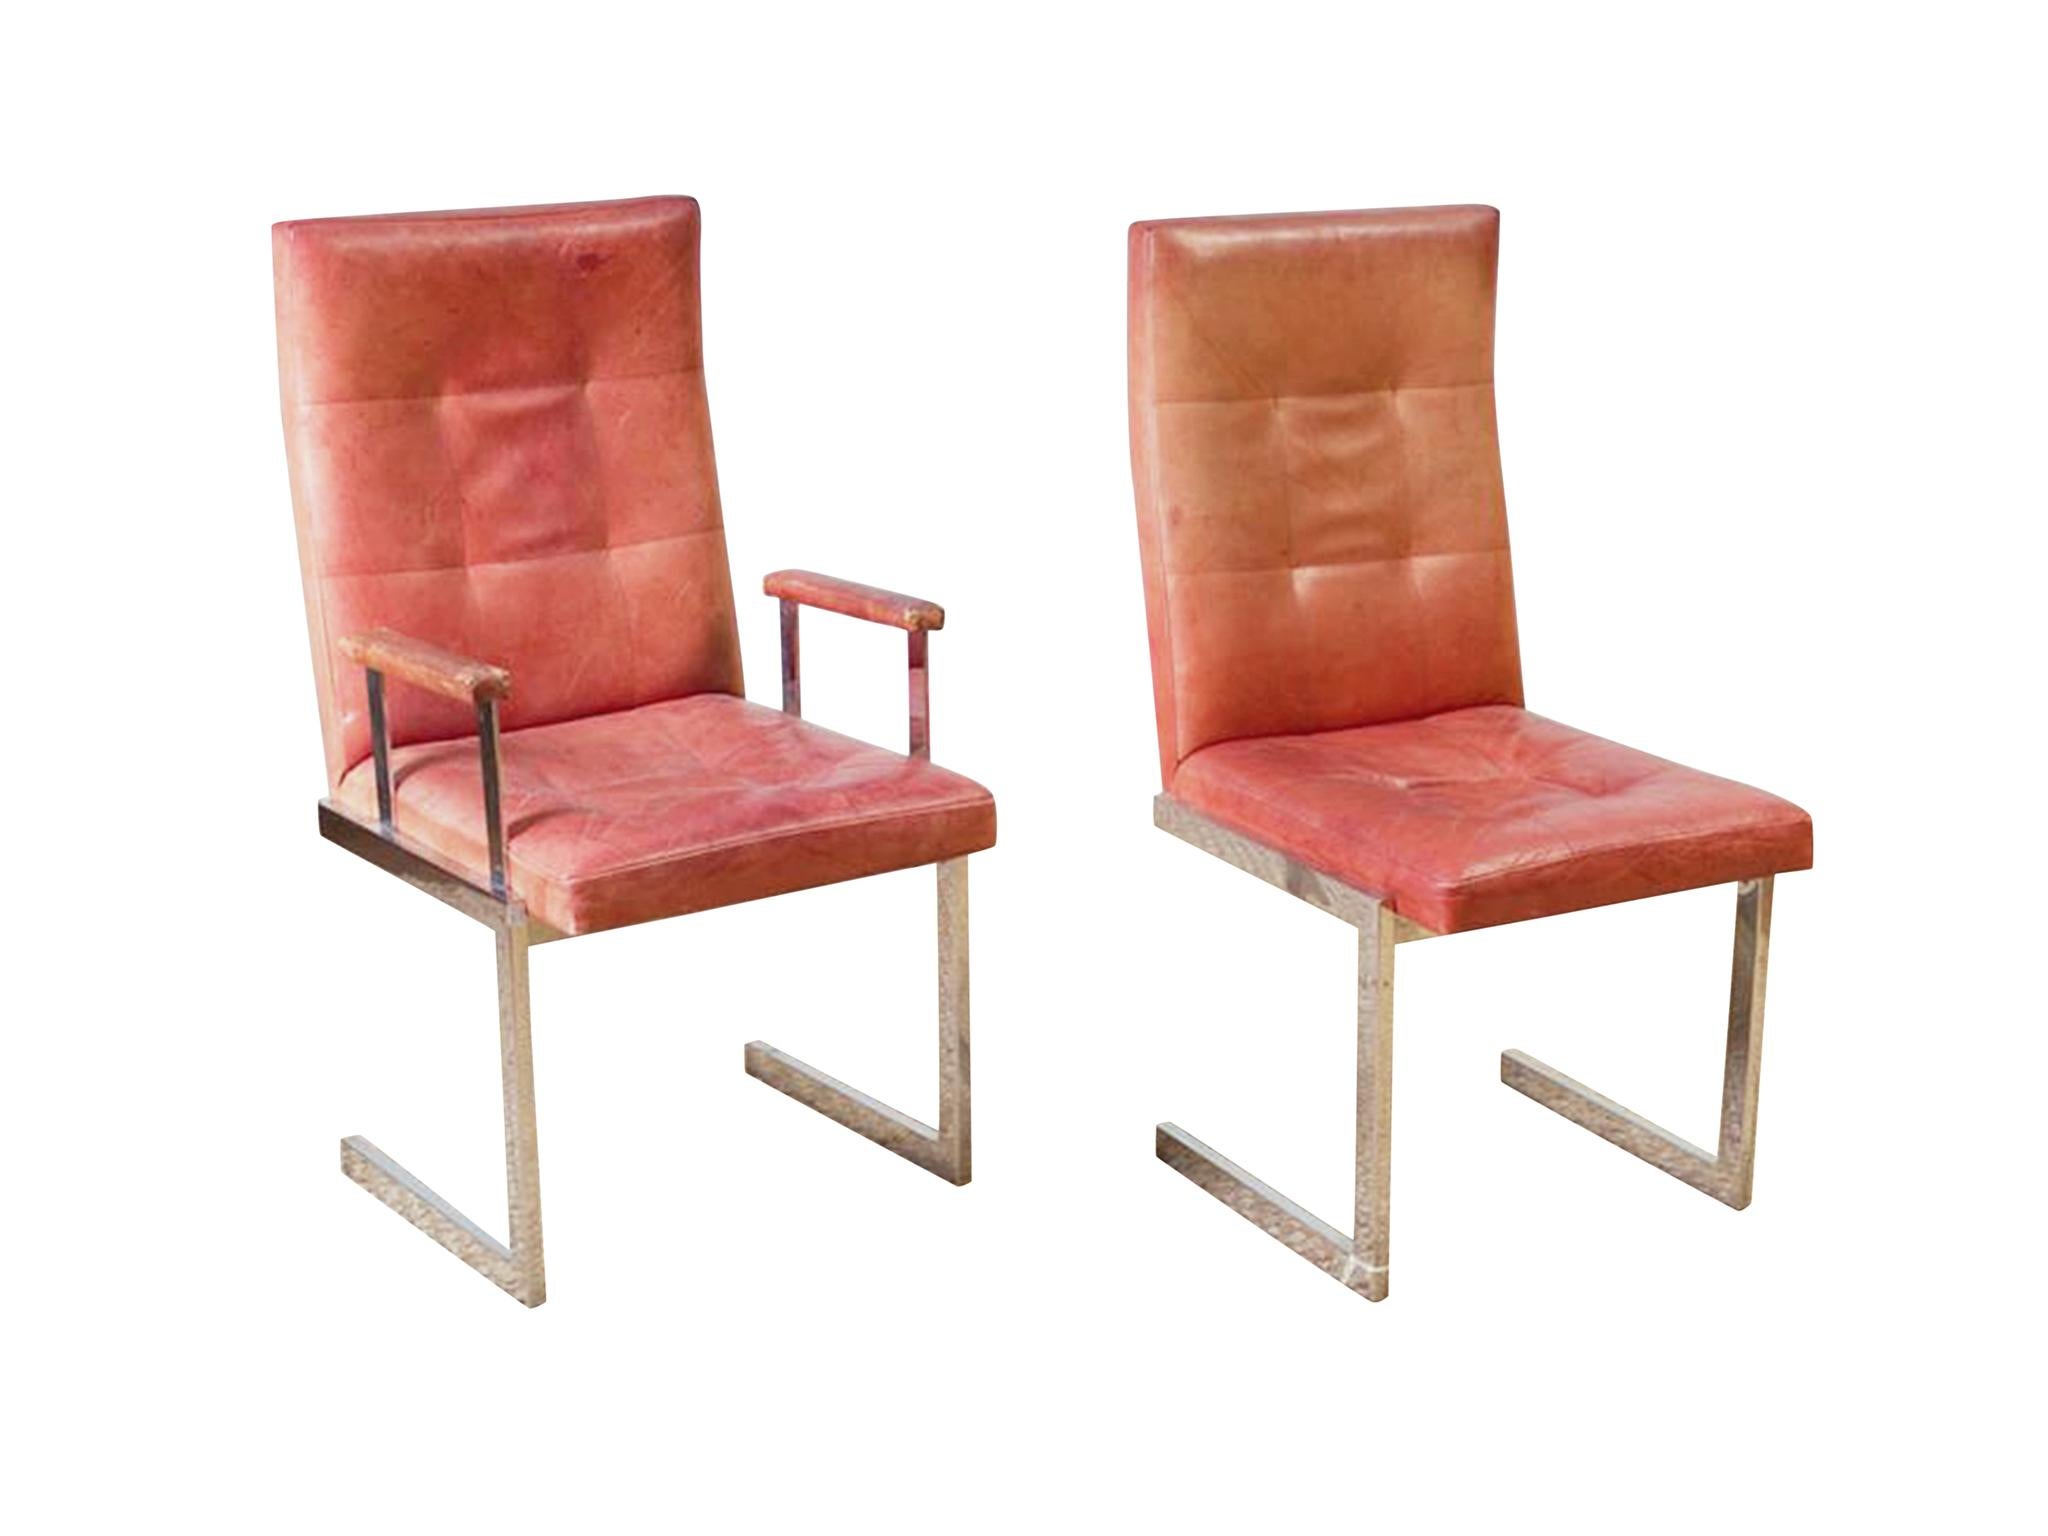 An excellent set of dining chairs that brings together the clean, functional lines of modern design and the elegance of Art Deco. Designed in the style of Milo Baughman in the 1970s. The set consists of two armchairs and four side chairs. They are